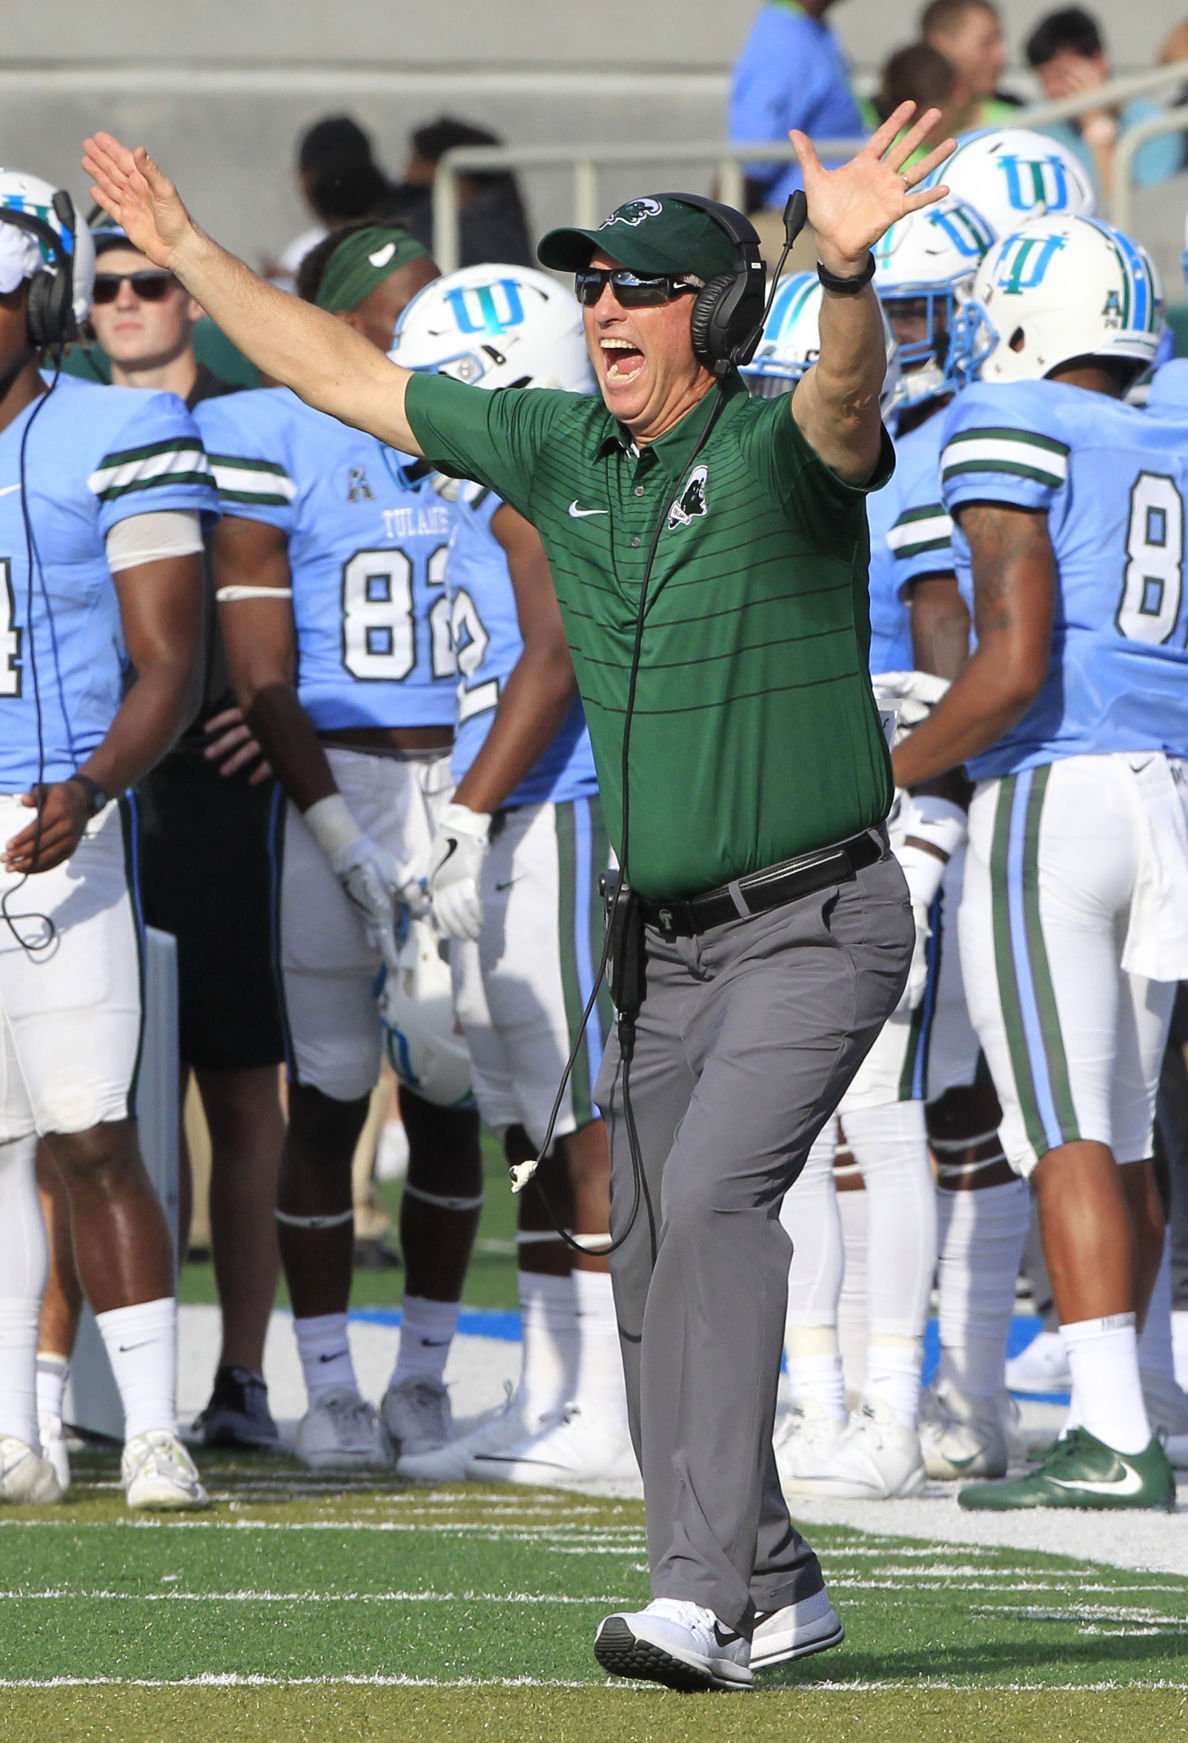 Tulane's players and coaches saying all the right things during losing